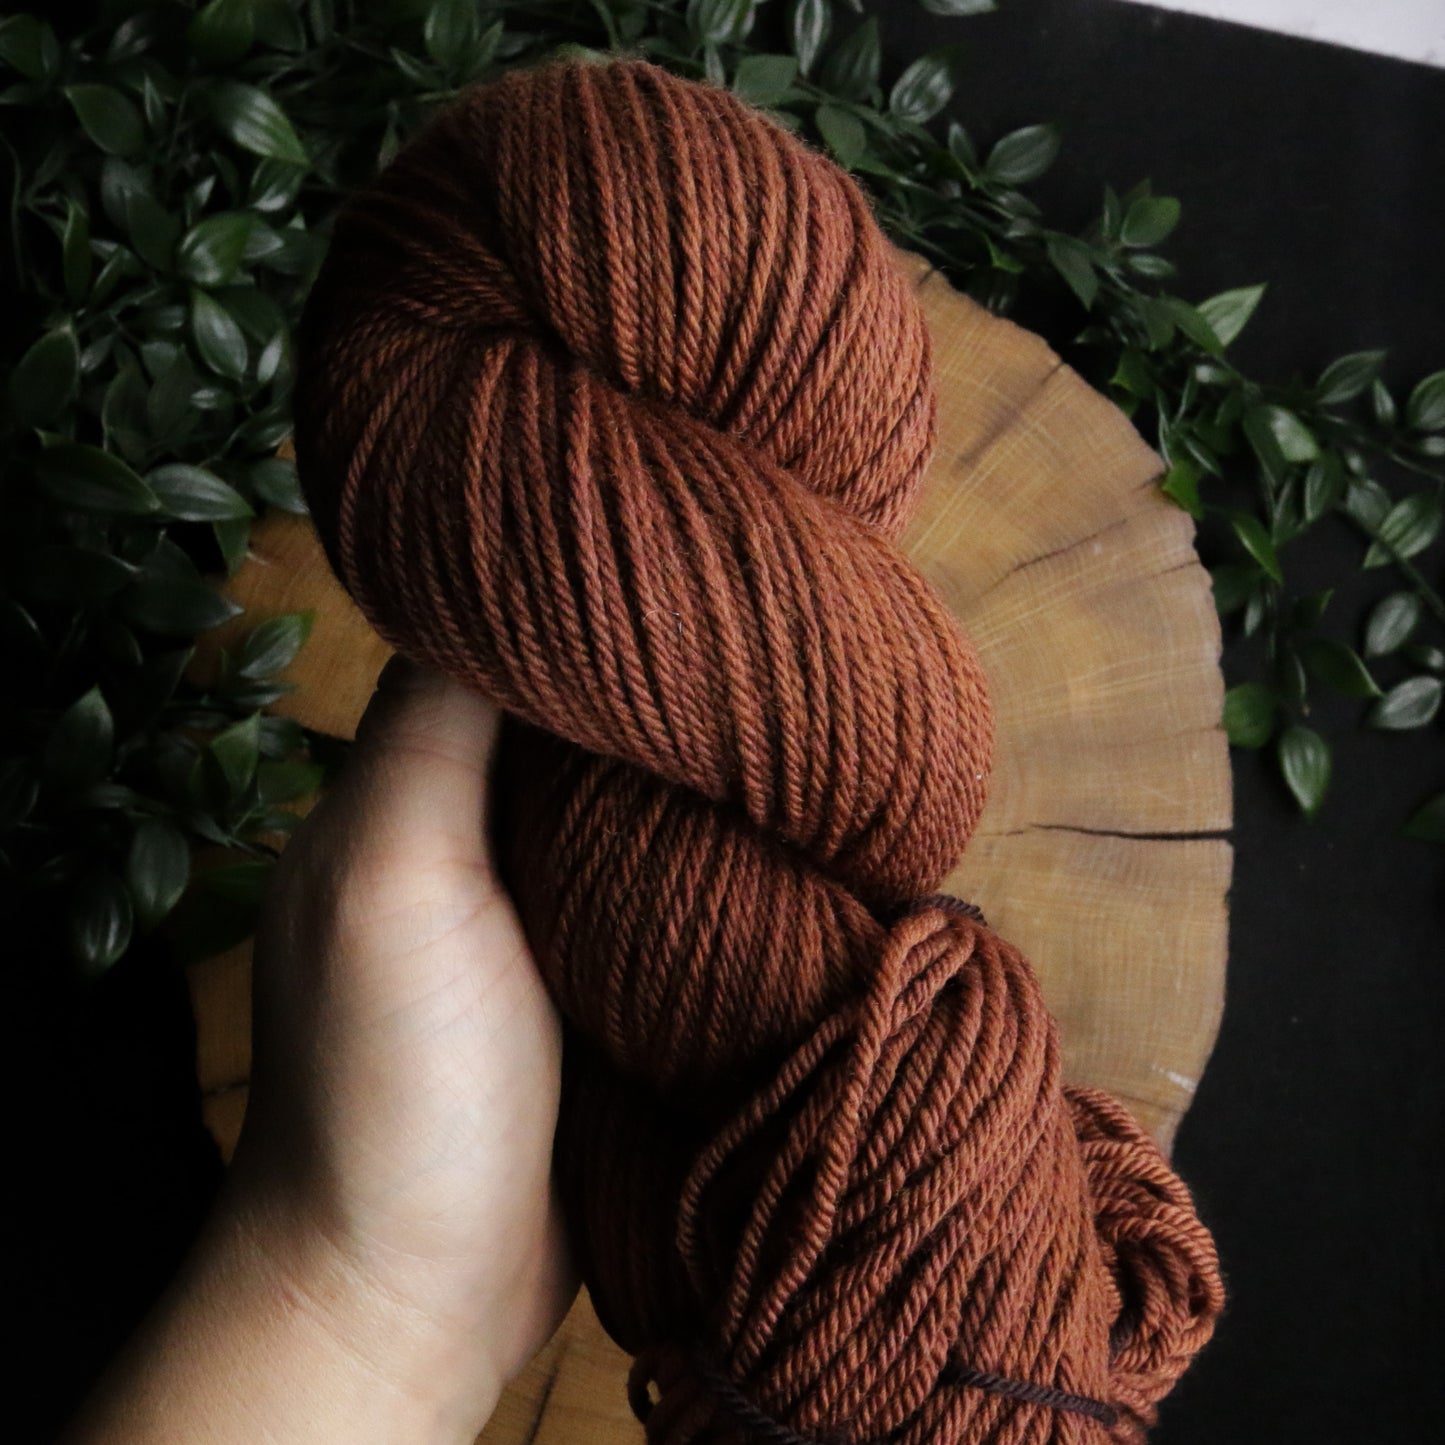 One of a Kind - Non-Superwash - DK Weight